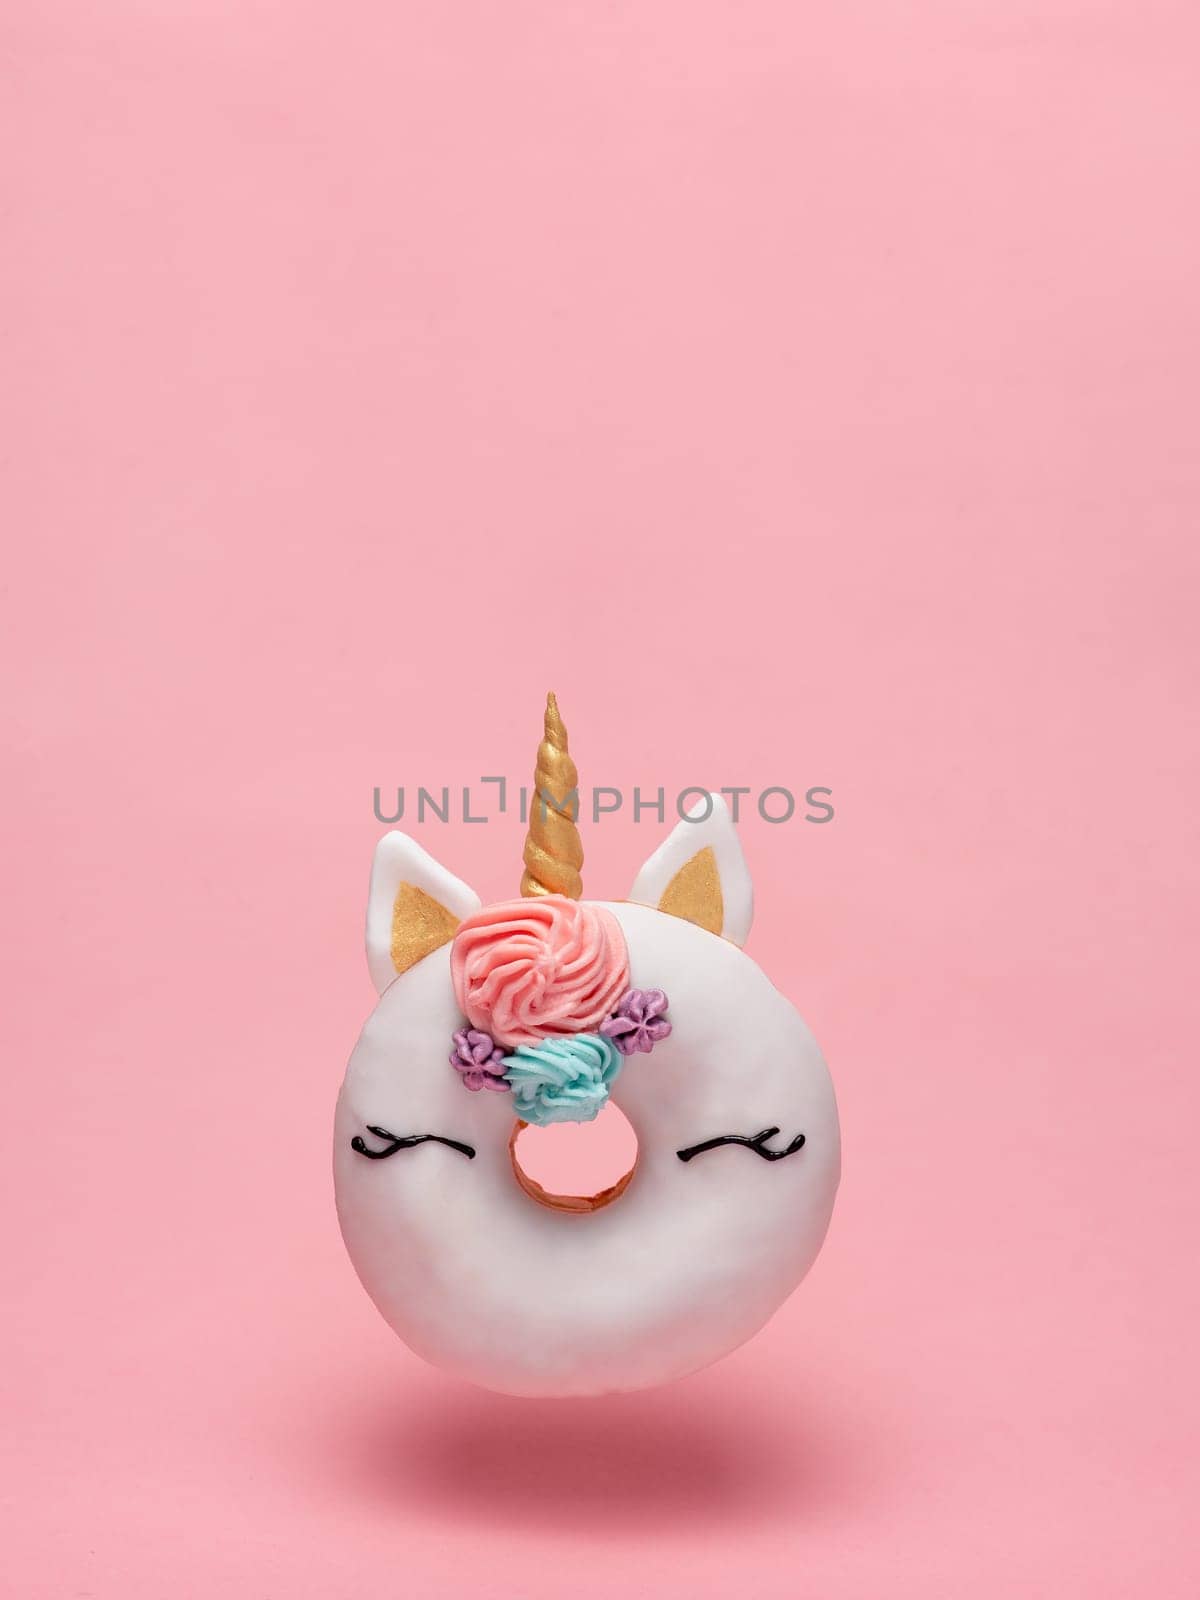 Unicorn donut flying, pink background, copy space by fascinadora